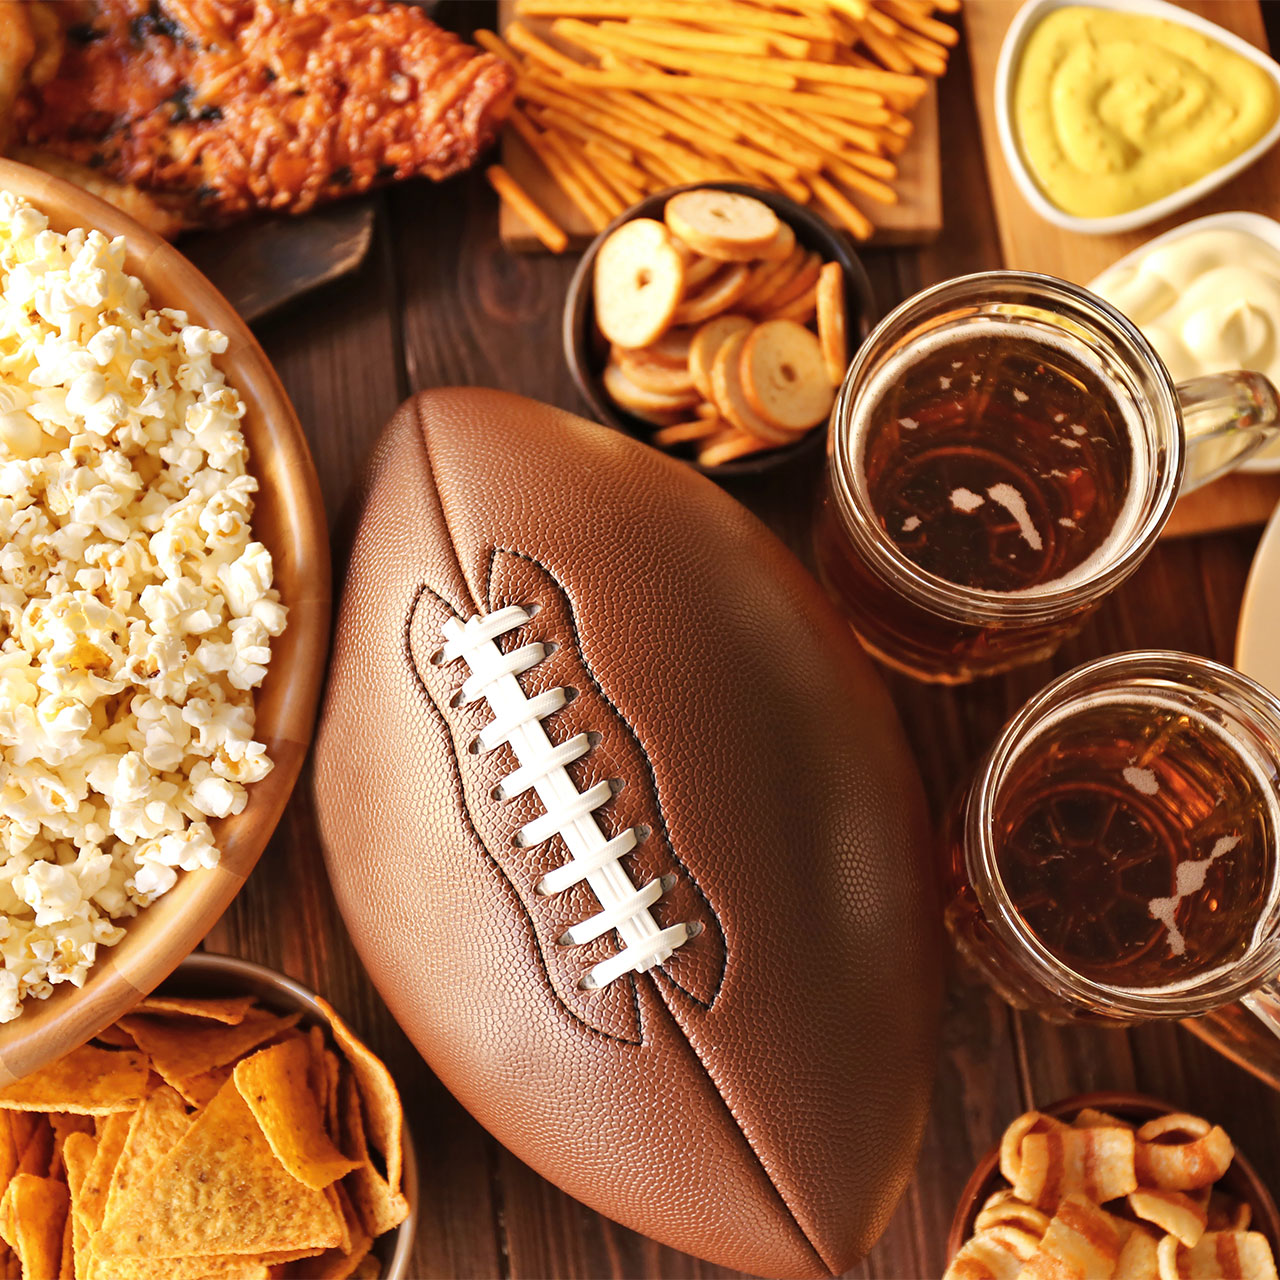 Are You Hosting A Super Bowl Party? Here’s The Best Places To Order From: Buffalo Wild Wings, Auntie Anne’s, & More